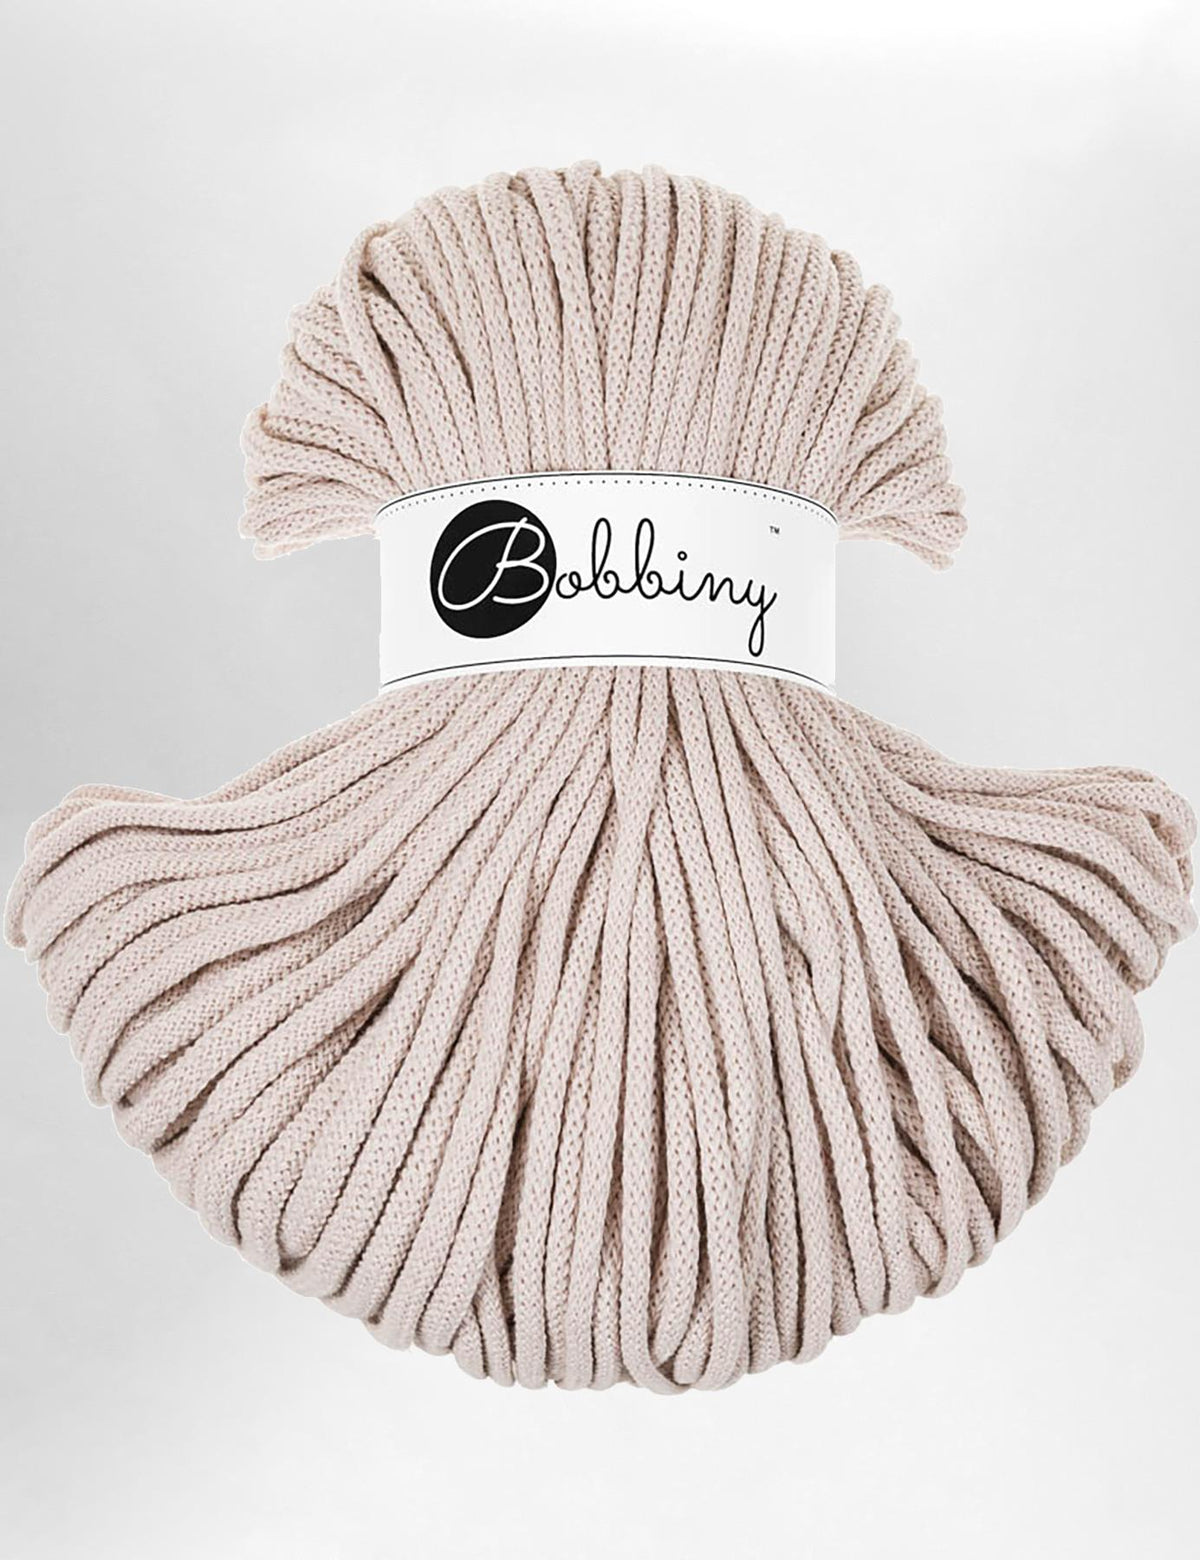 5mm Nude recycled cotton macrame cord by Bobbiny (100m)